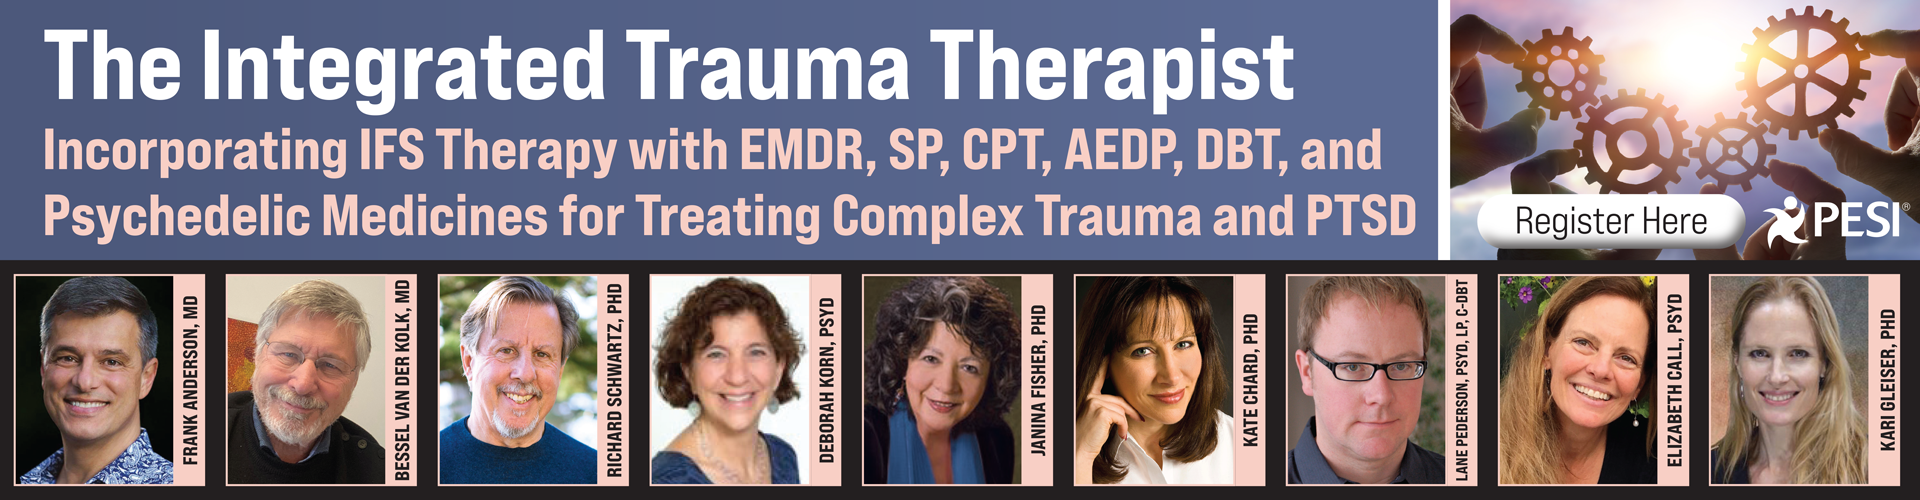 The Integrated Trauma Therapist: Incorporating IFS with EMDR, SP, CPT, AEDP, DBT, and Psychedelic Medicines for Treating Complex Trauma and PTSD